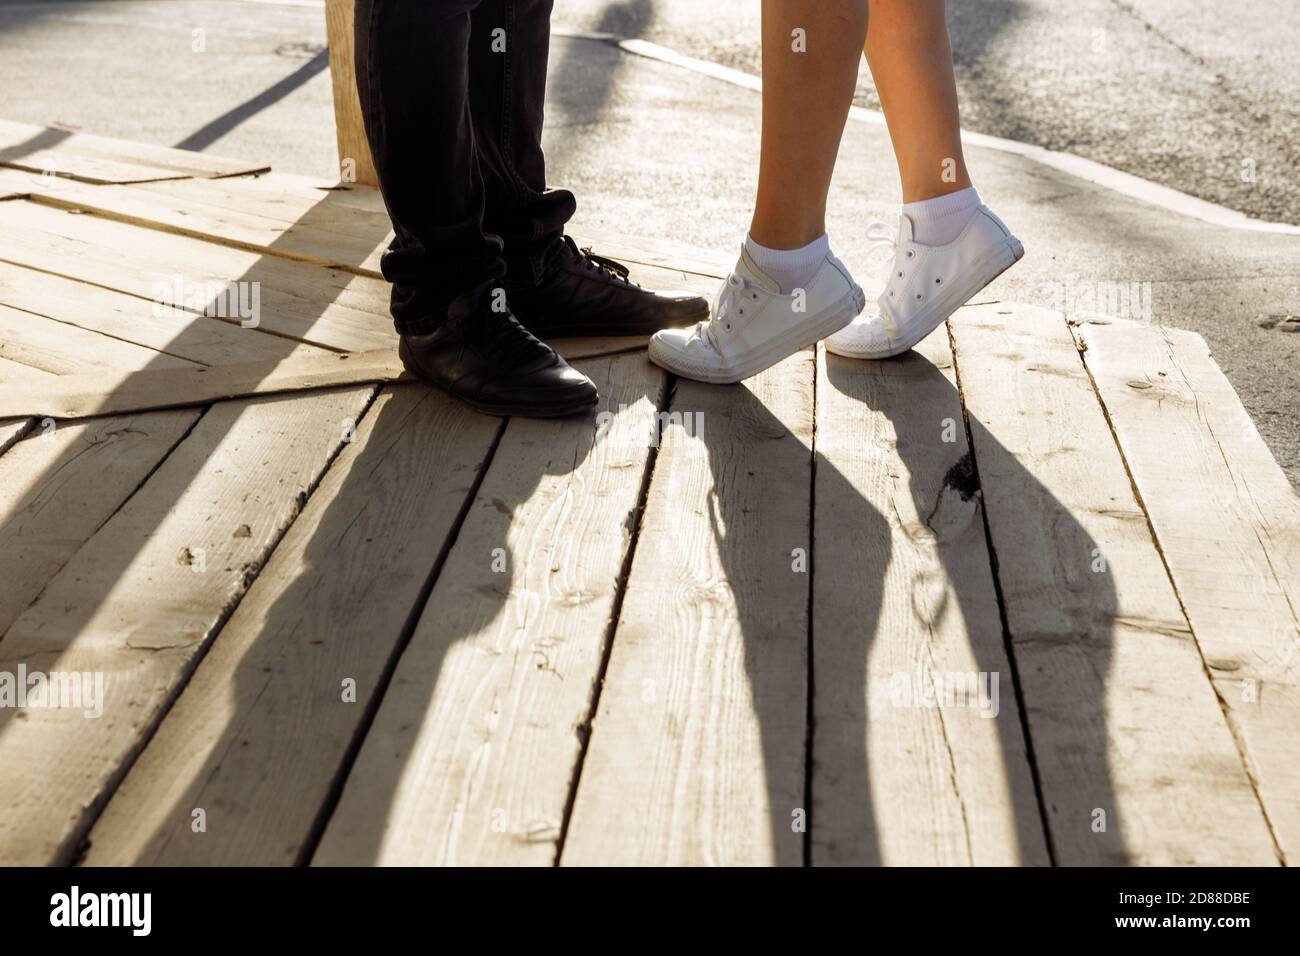 Man Seen from between Legs of Woman Stock Photo - Image of dating, couple:  42229036